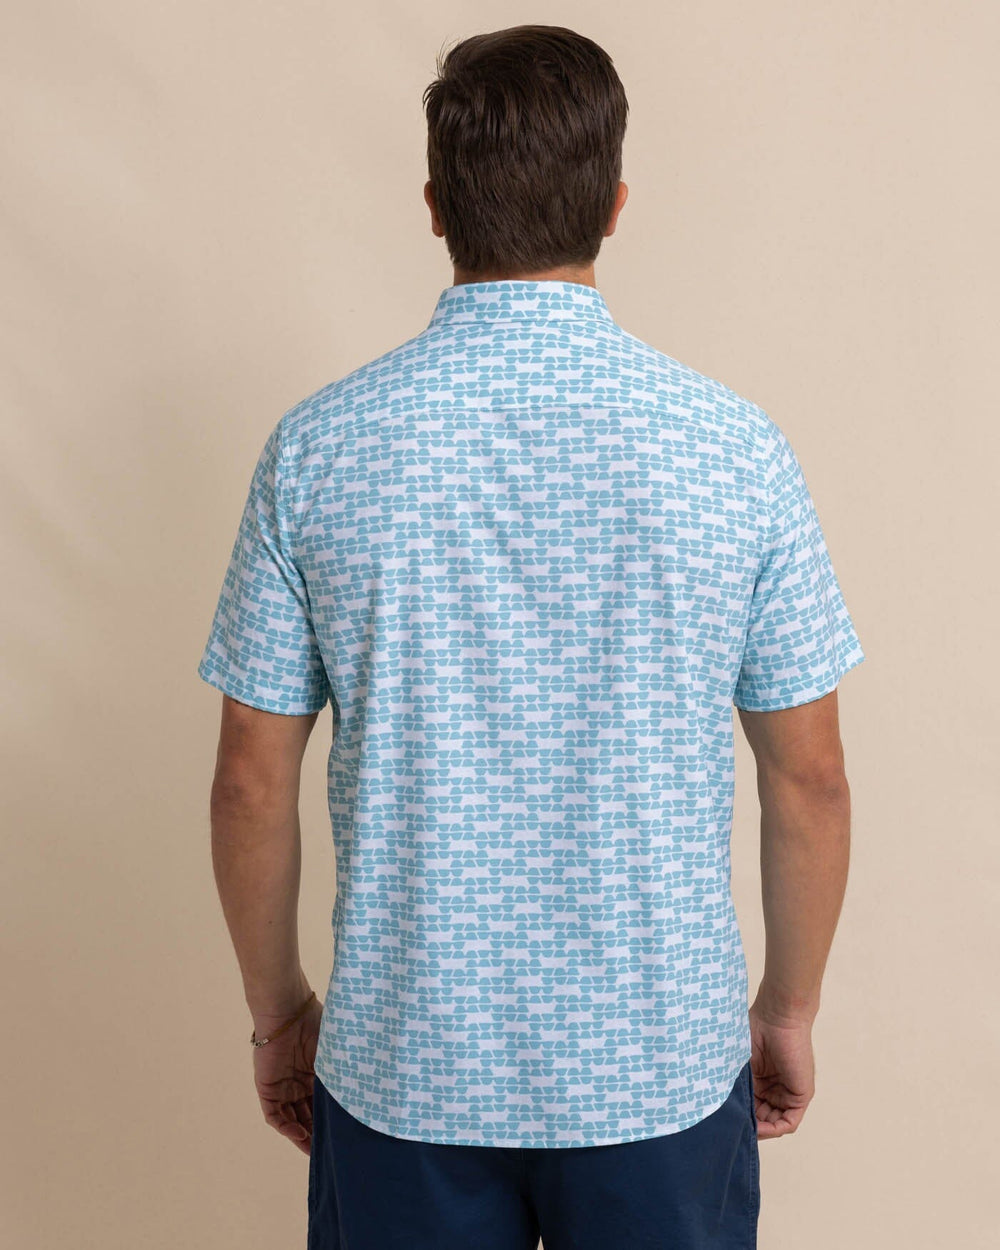 The back view of the Southern Tide brrr Intercoastal Heather Stay Shady Short Sleeve Sport Shirt by Southern Tide - Heather Wake Blue